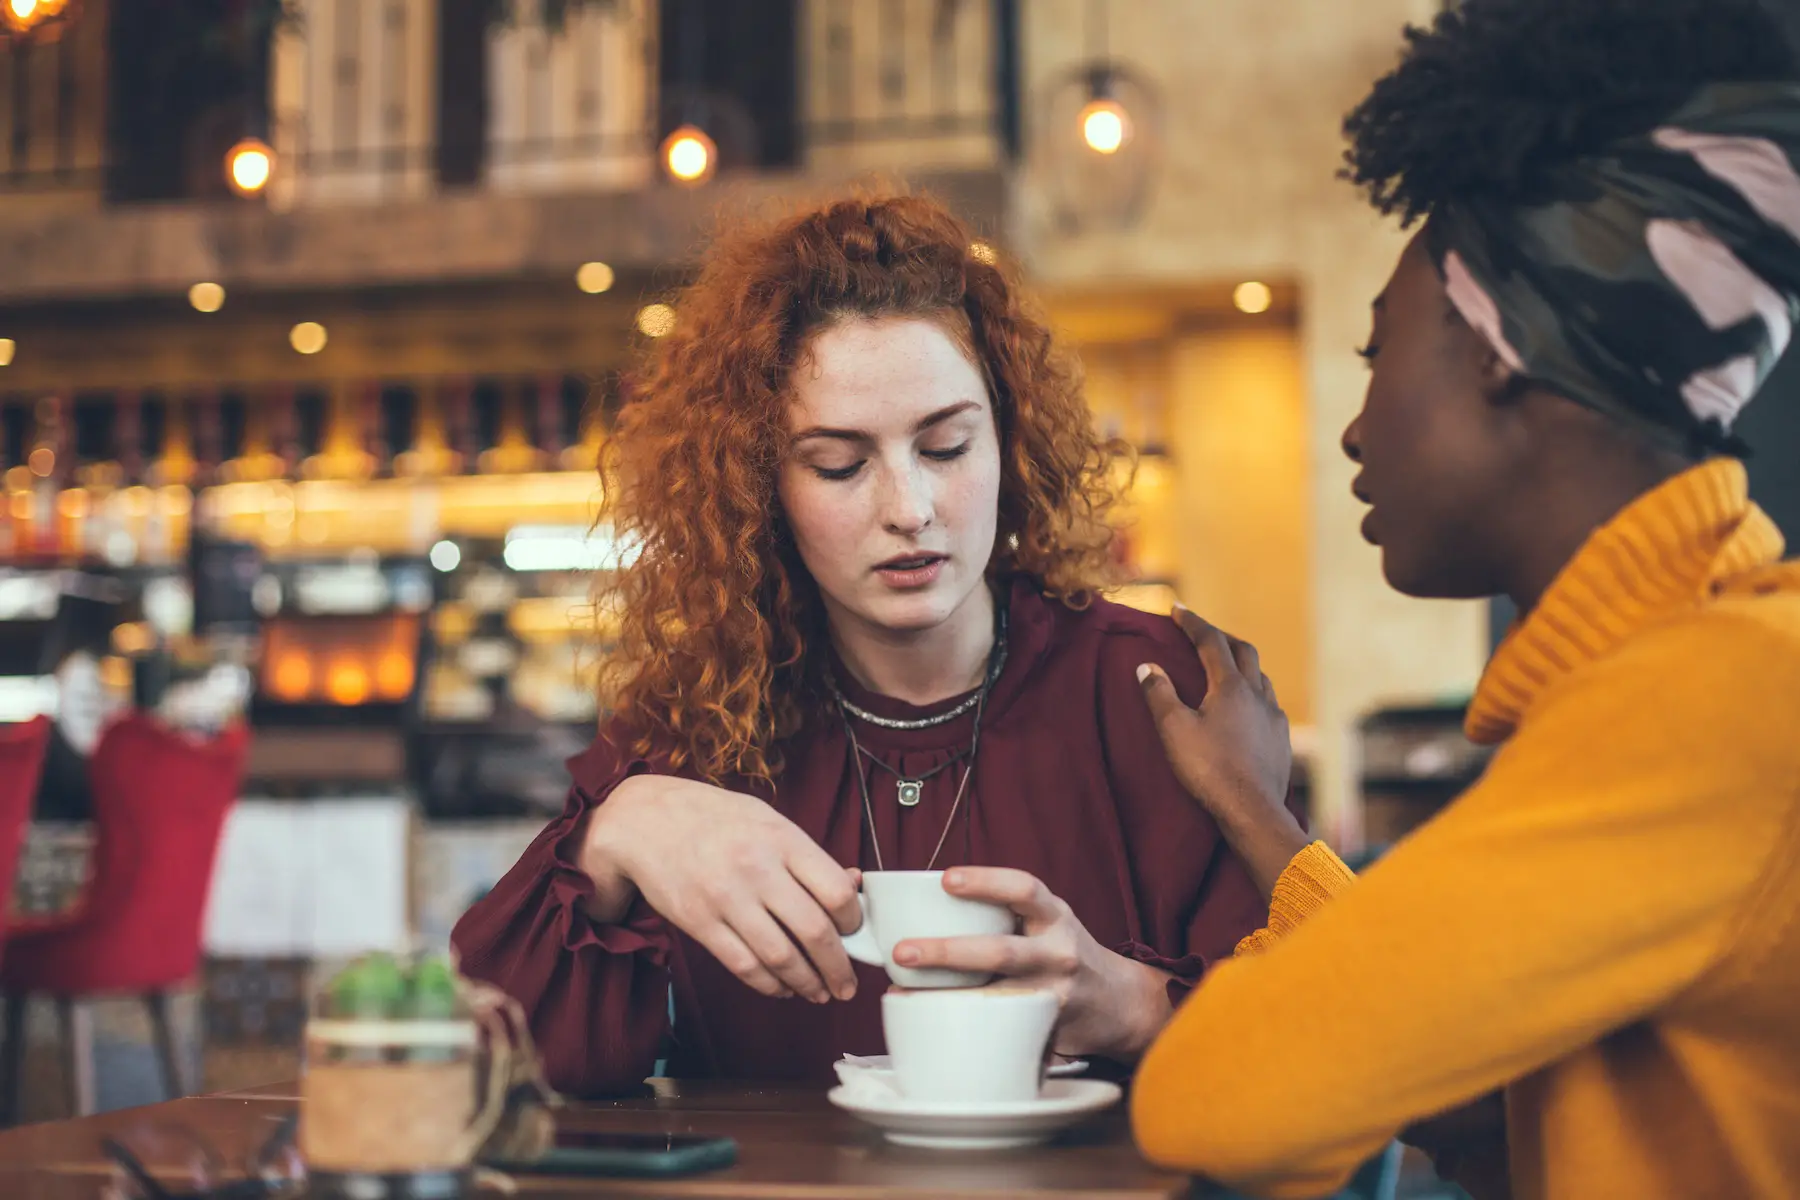 Two women meet for coffee at a cafe in Italy; one looks upset while the other places a hand on her shoulder